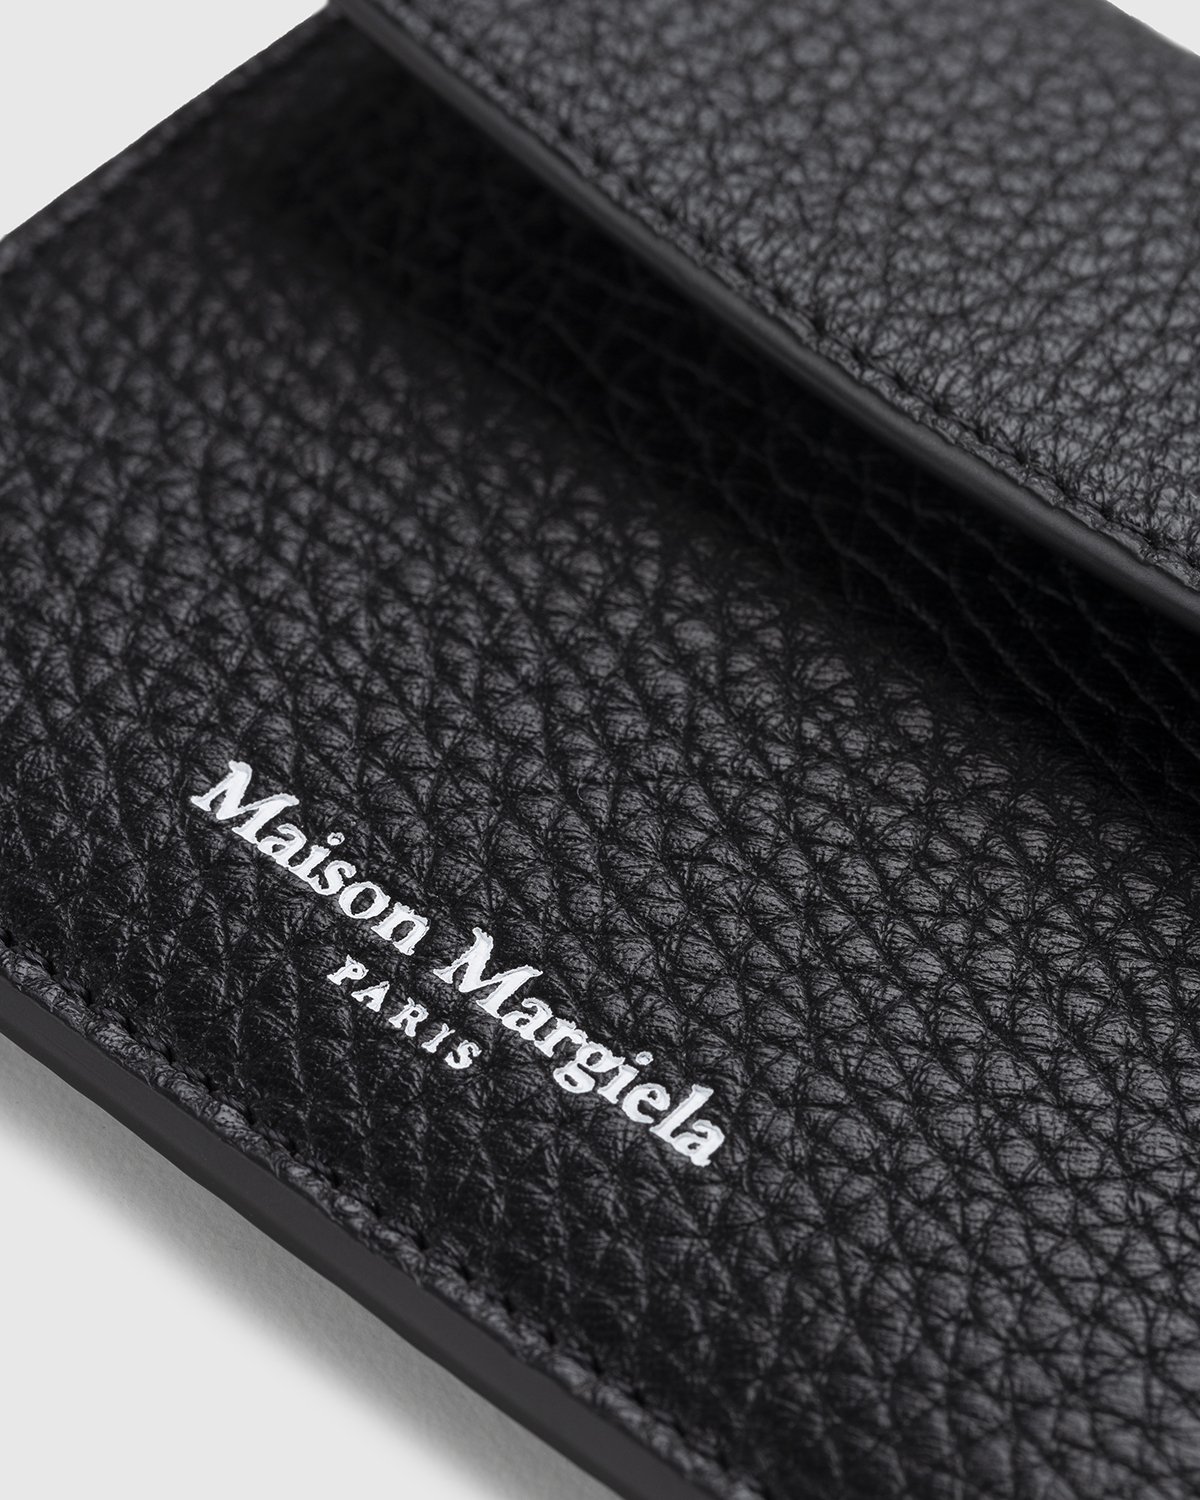 Maison Margiela - Coin and Card Holder Black - Accessories - Black - Image 3